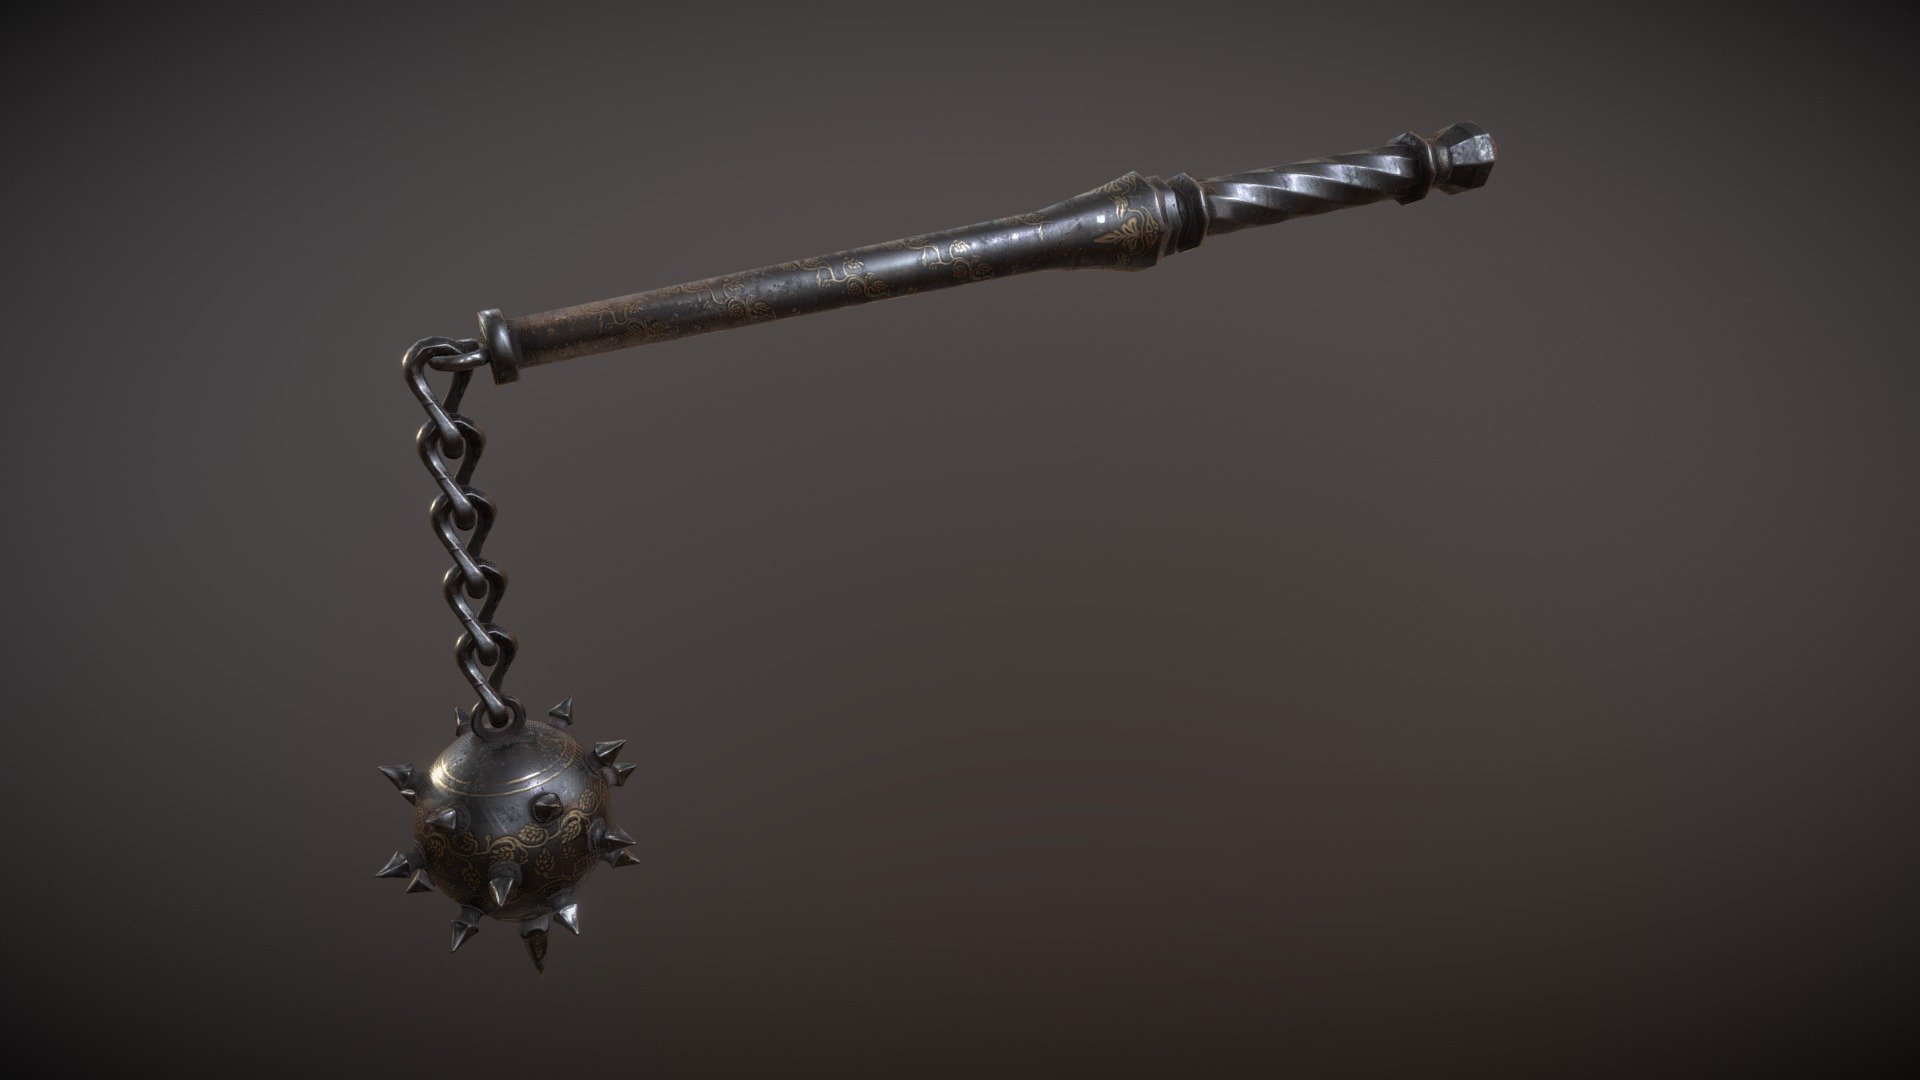 Low poly antique flail with detailed normal map and PBR textures. 
Ideal for real-time 3d model